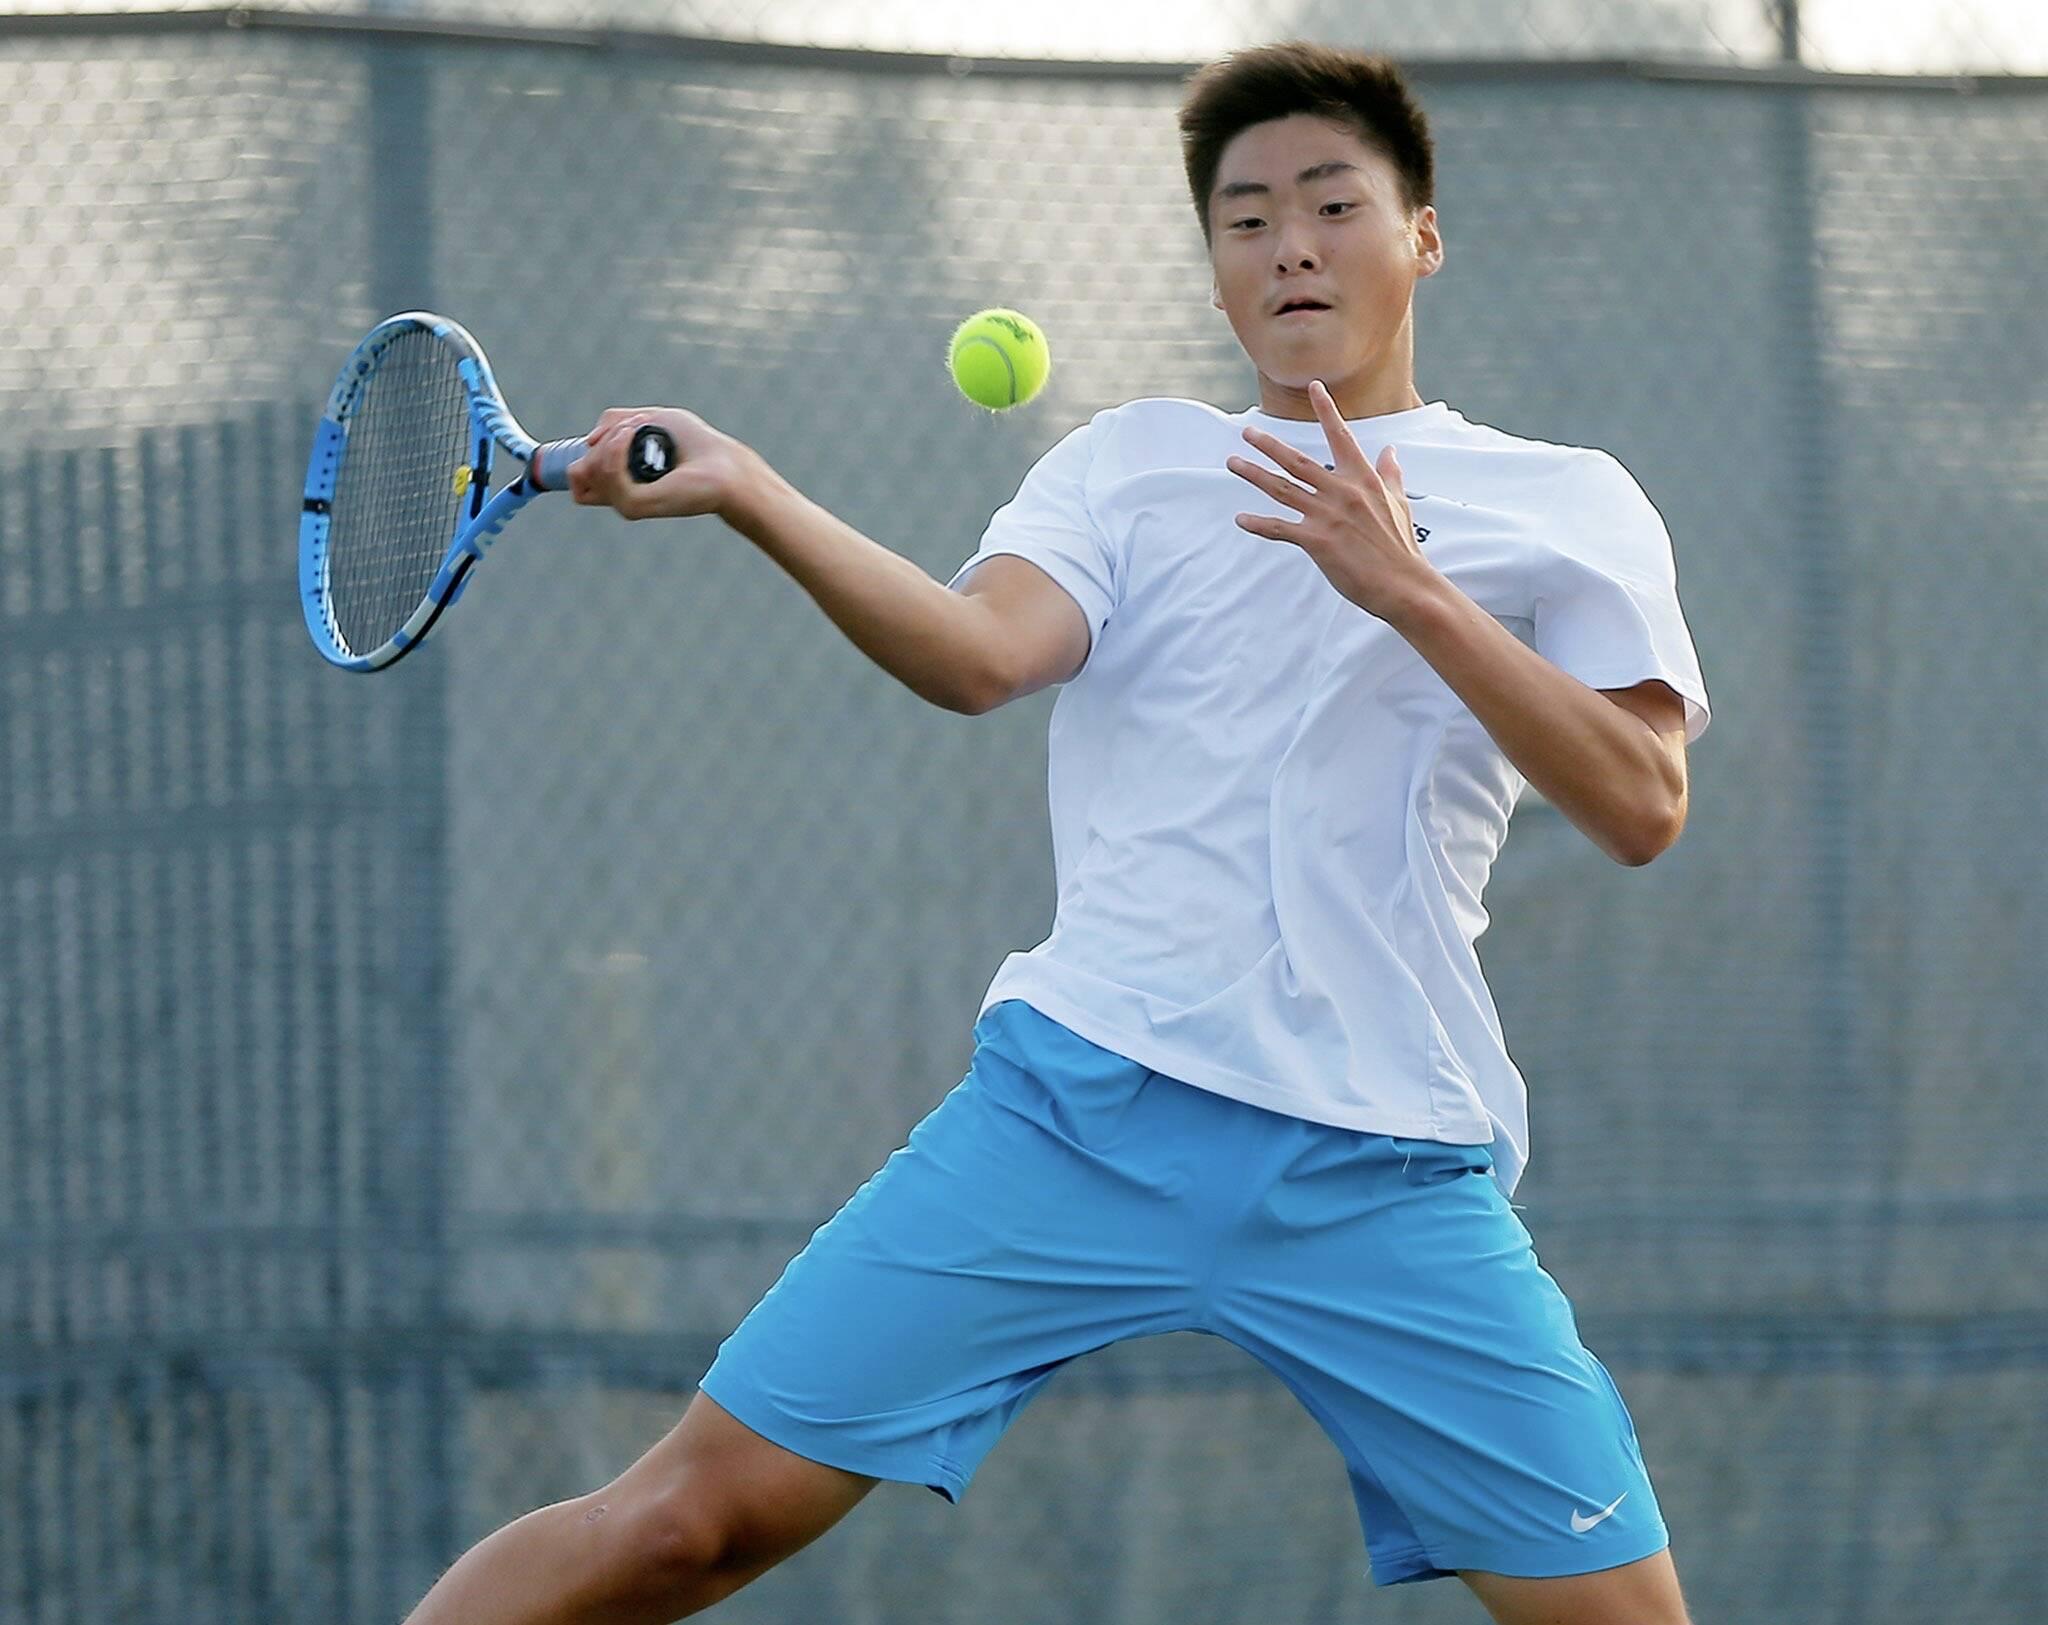 Jackson sophomore Ben Lee cruised to the Class 4A District 1 singles title as part of a dominant showing by the Timberwolves’ star trio. (Ryan Berry / The Herald)